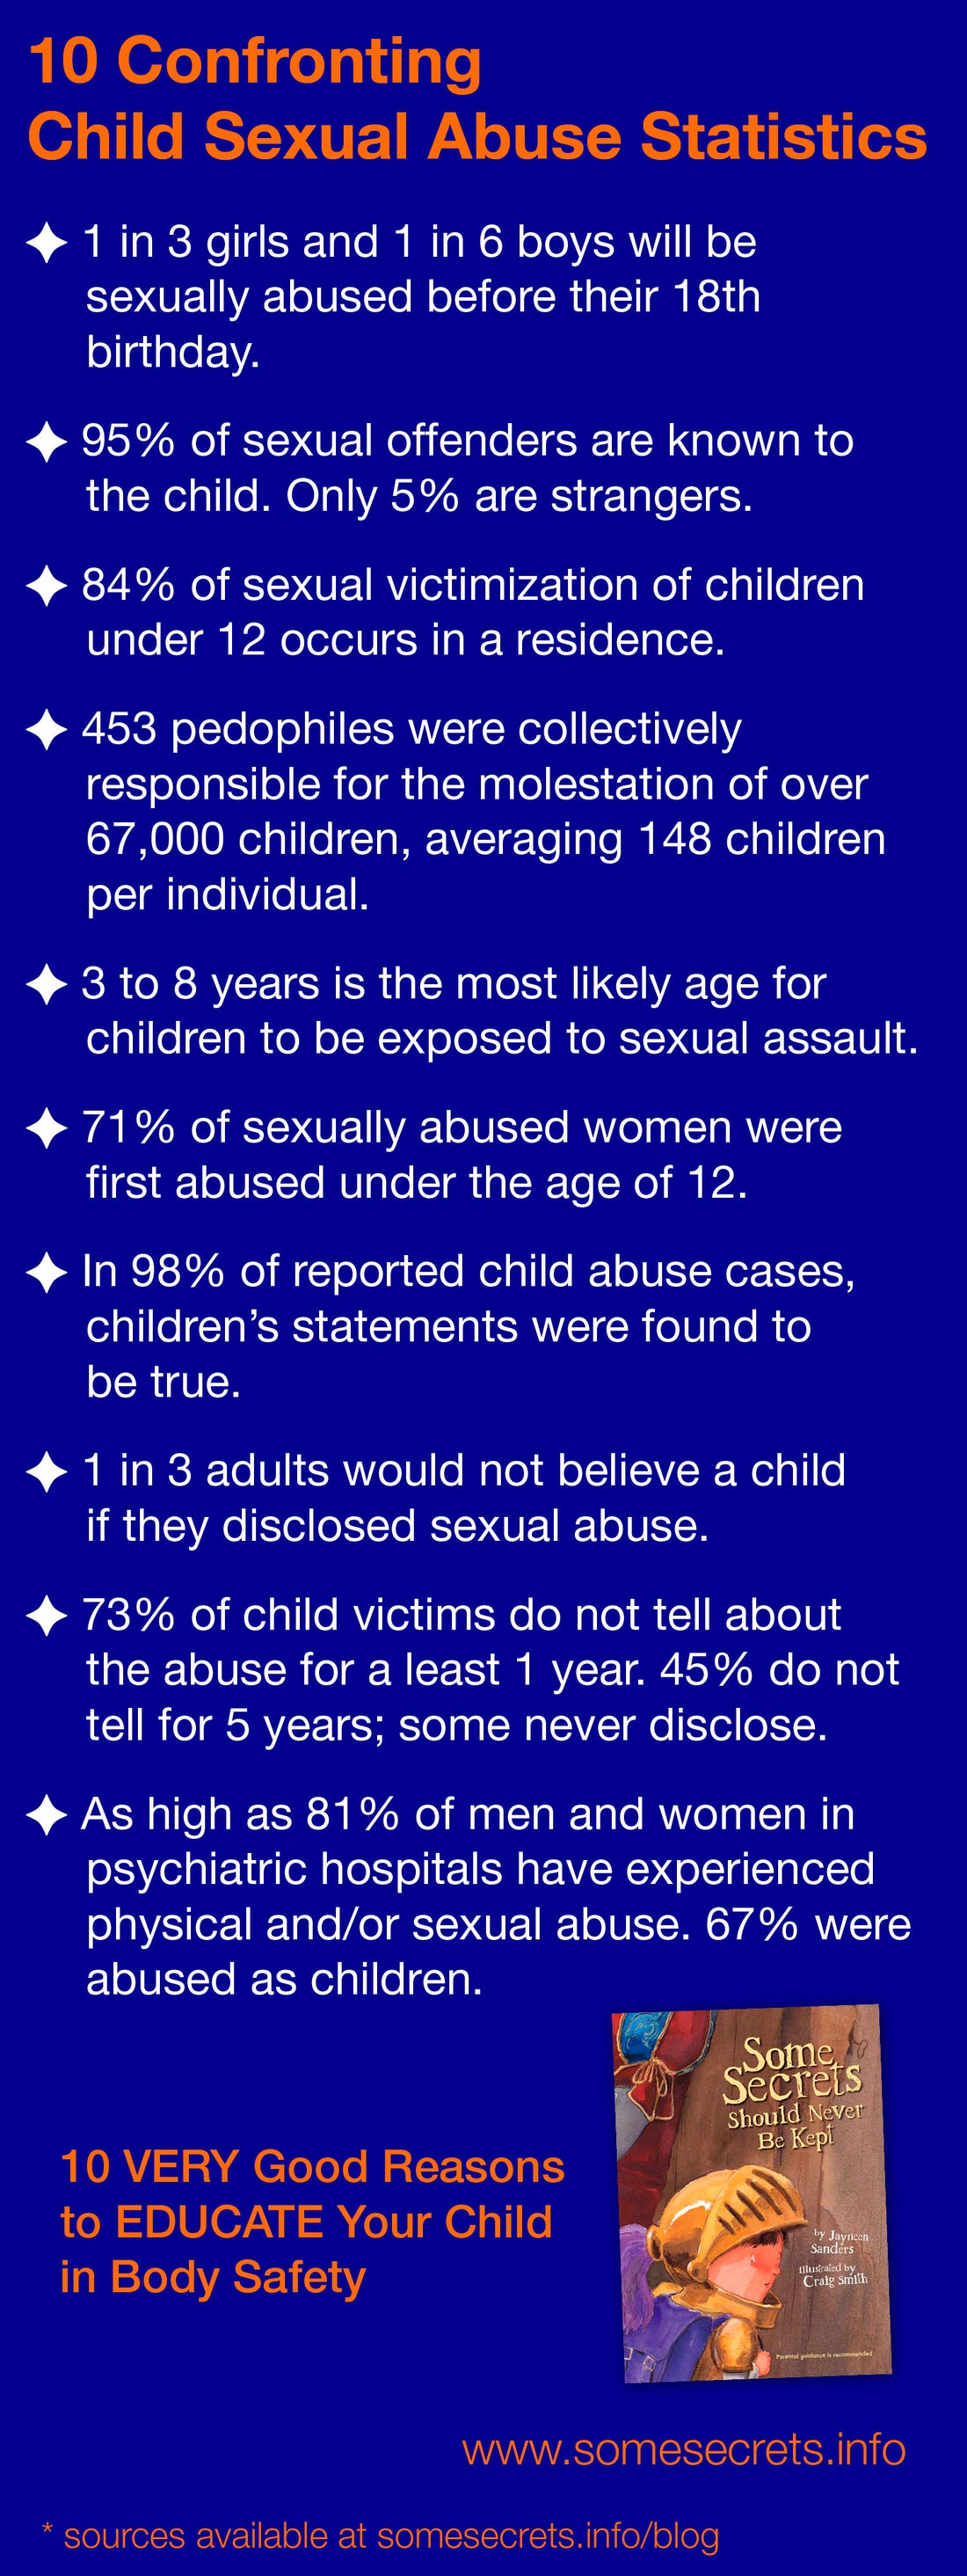 10 Confronting Child Sexual Abuse Statistics